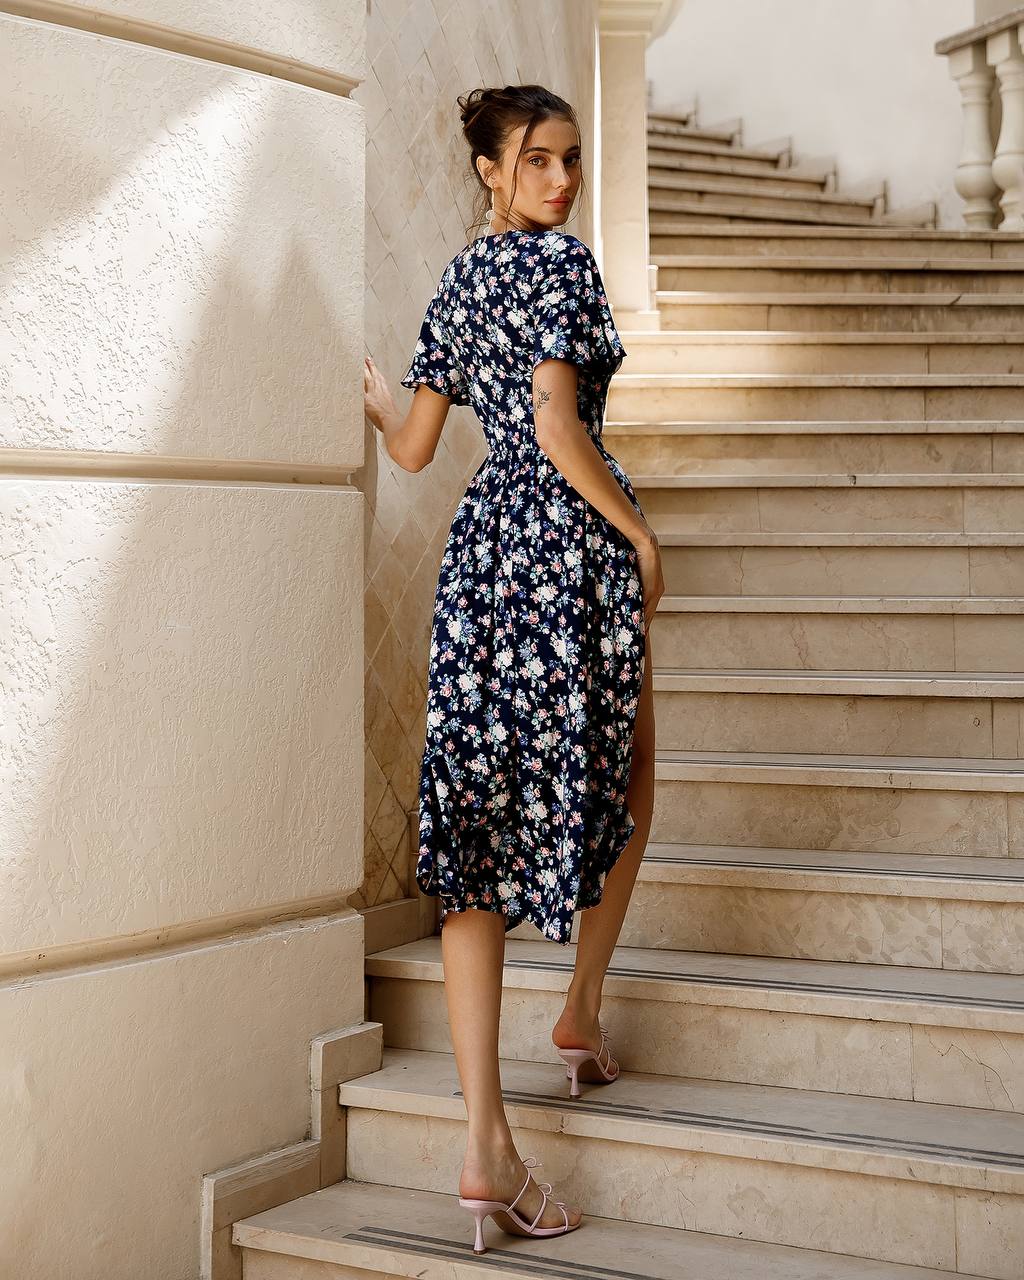 a woman in a blue dress is standing on some steps